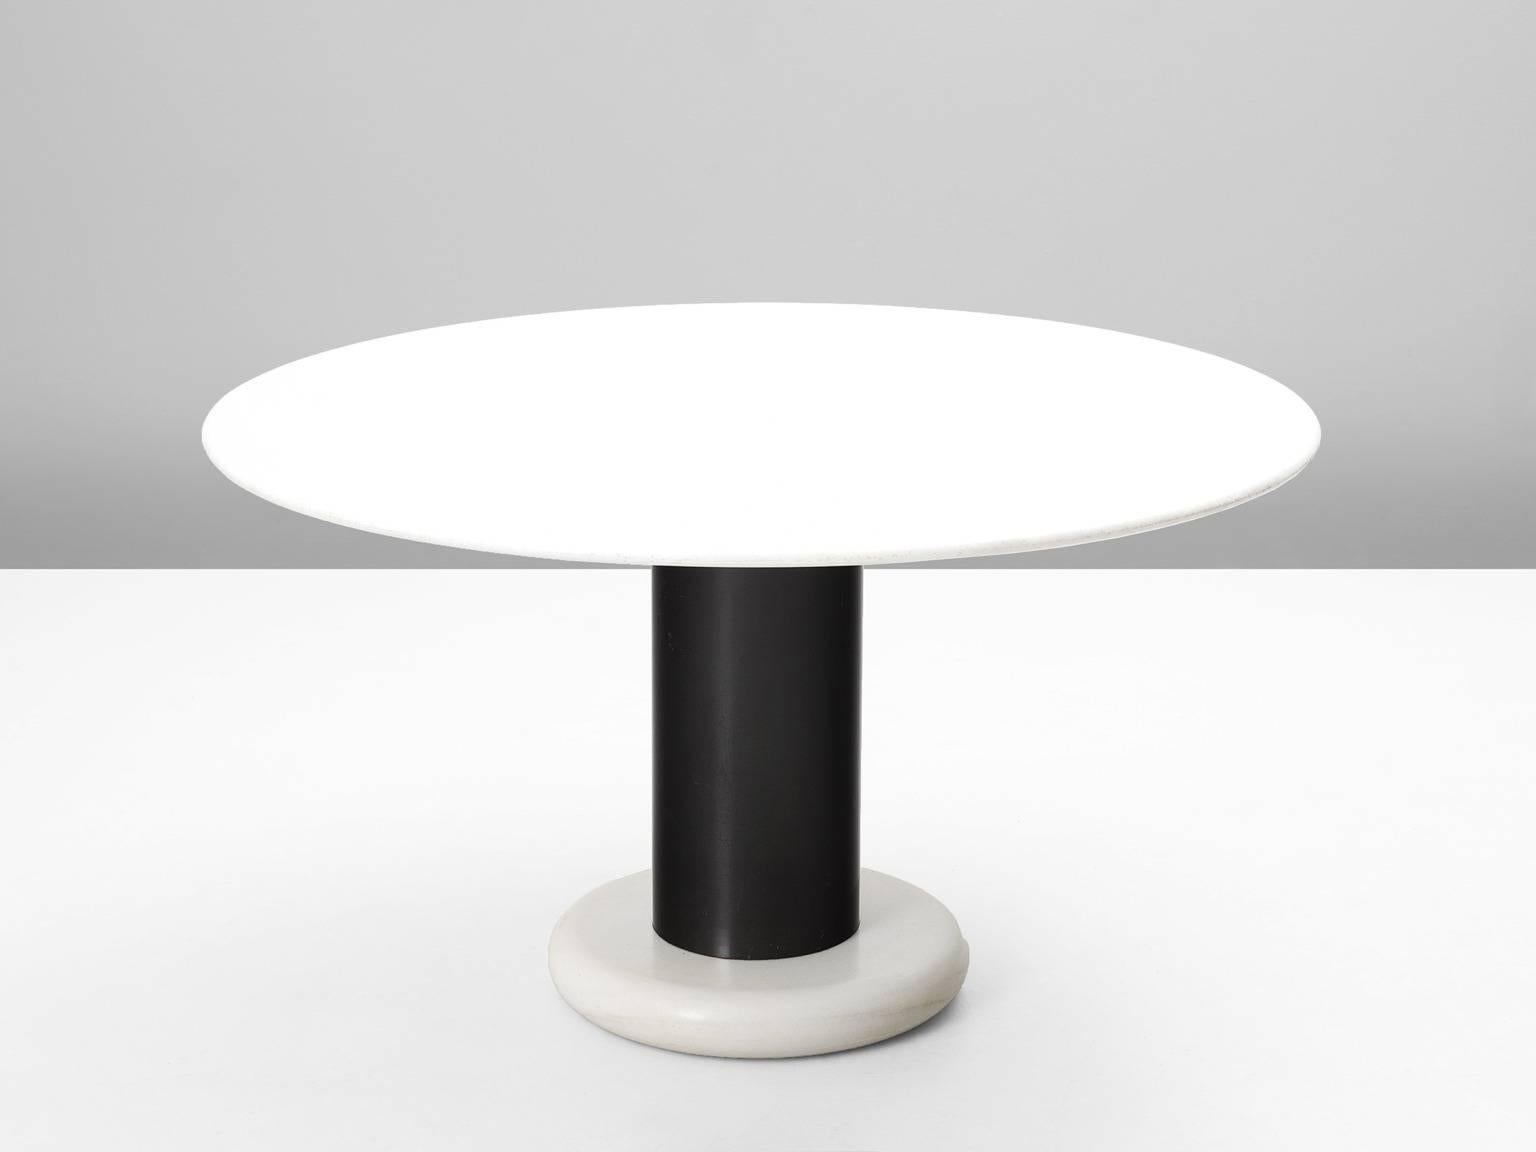 Table, in marble and metal, by Ettore Sottsass for Poltronova, Italy 1965.

Round pedestal table by Italian designer Ettore Sottsass. A white round base with black metal cylindrical column. The round top is executed in beautiful white marble. A